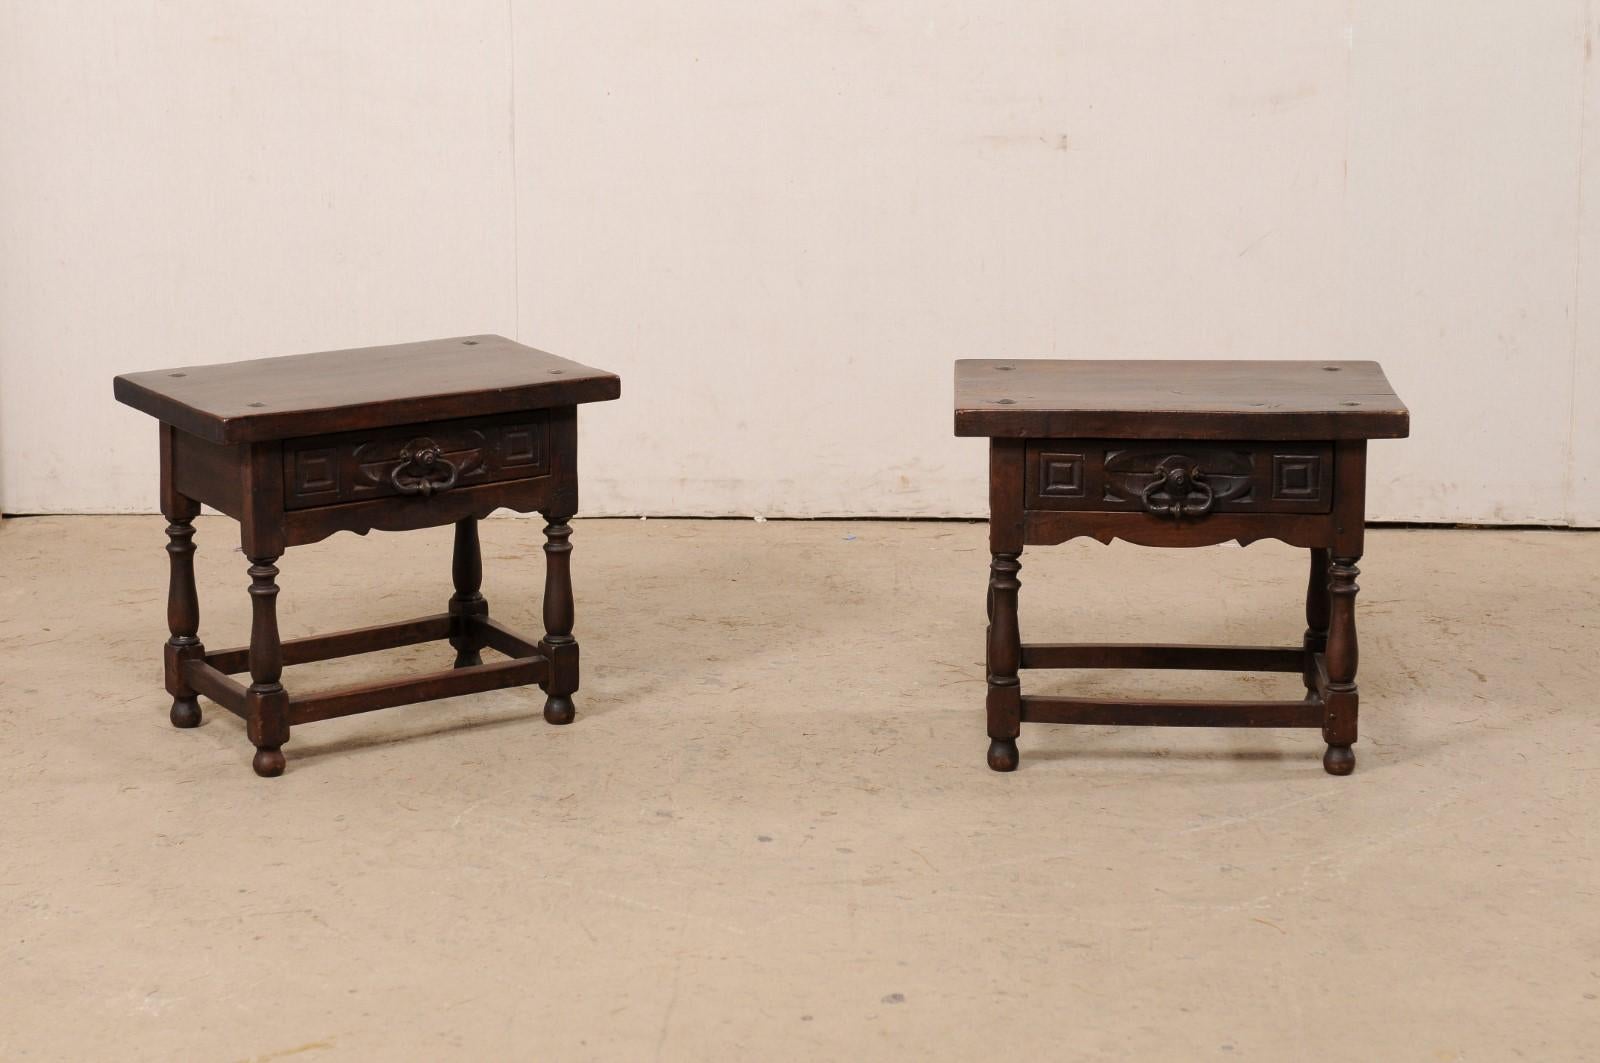 An Italian pair of carved-walnut side tables with drawer from the 19th century. This antique pair of tables from Italy each have a thick walnut slab top with hammered iron nail-heads at each of the four corners, which overhangs the apron below that